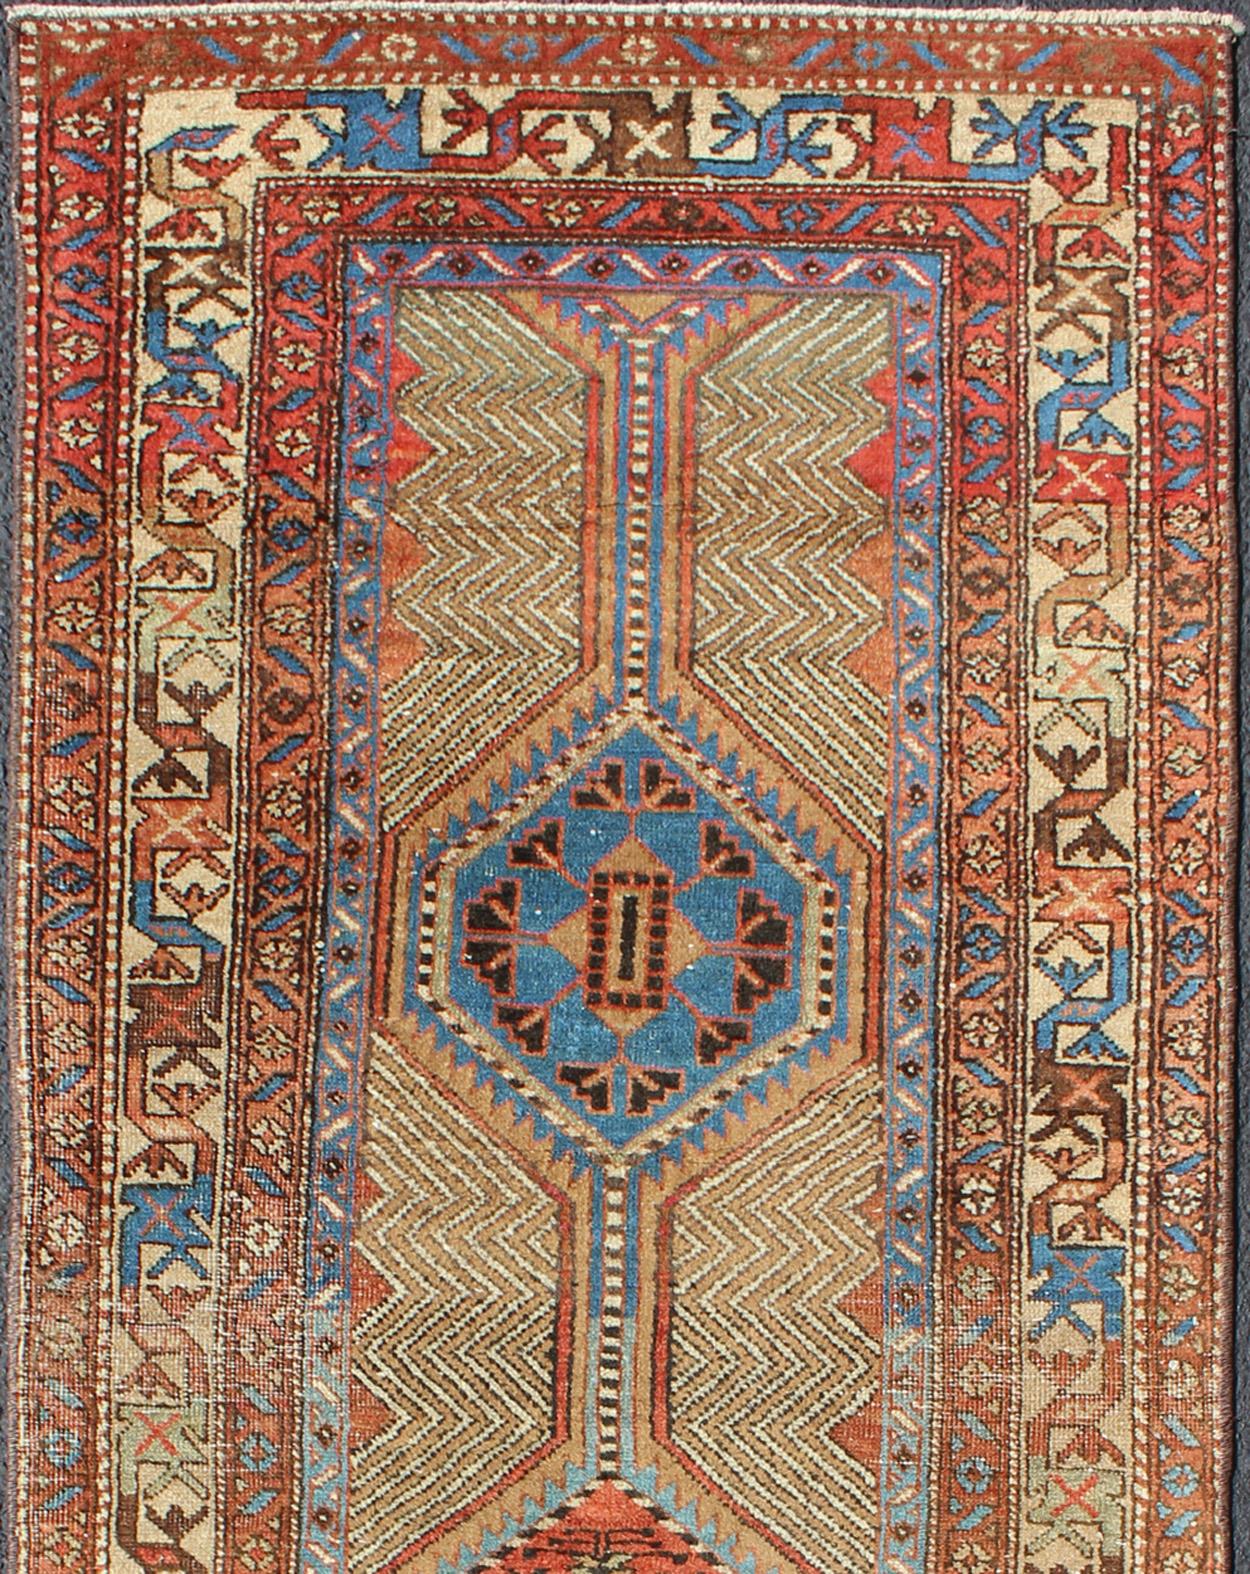 Hand-Knotted Colorful Antique Persian Serab Gallery Rug with Unique Geometric Design